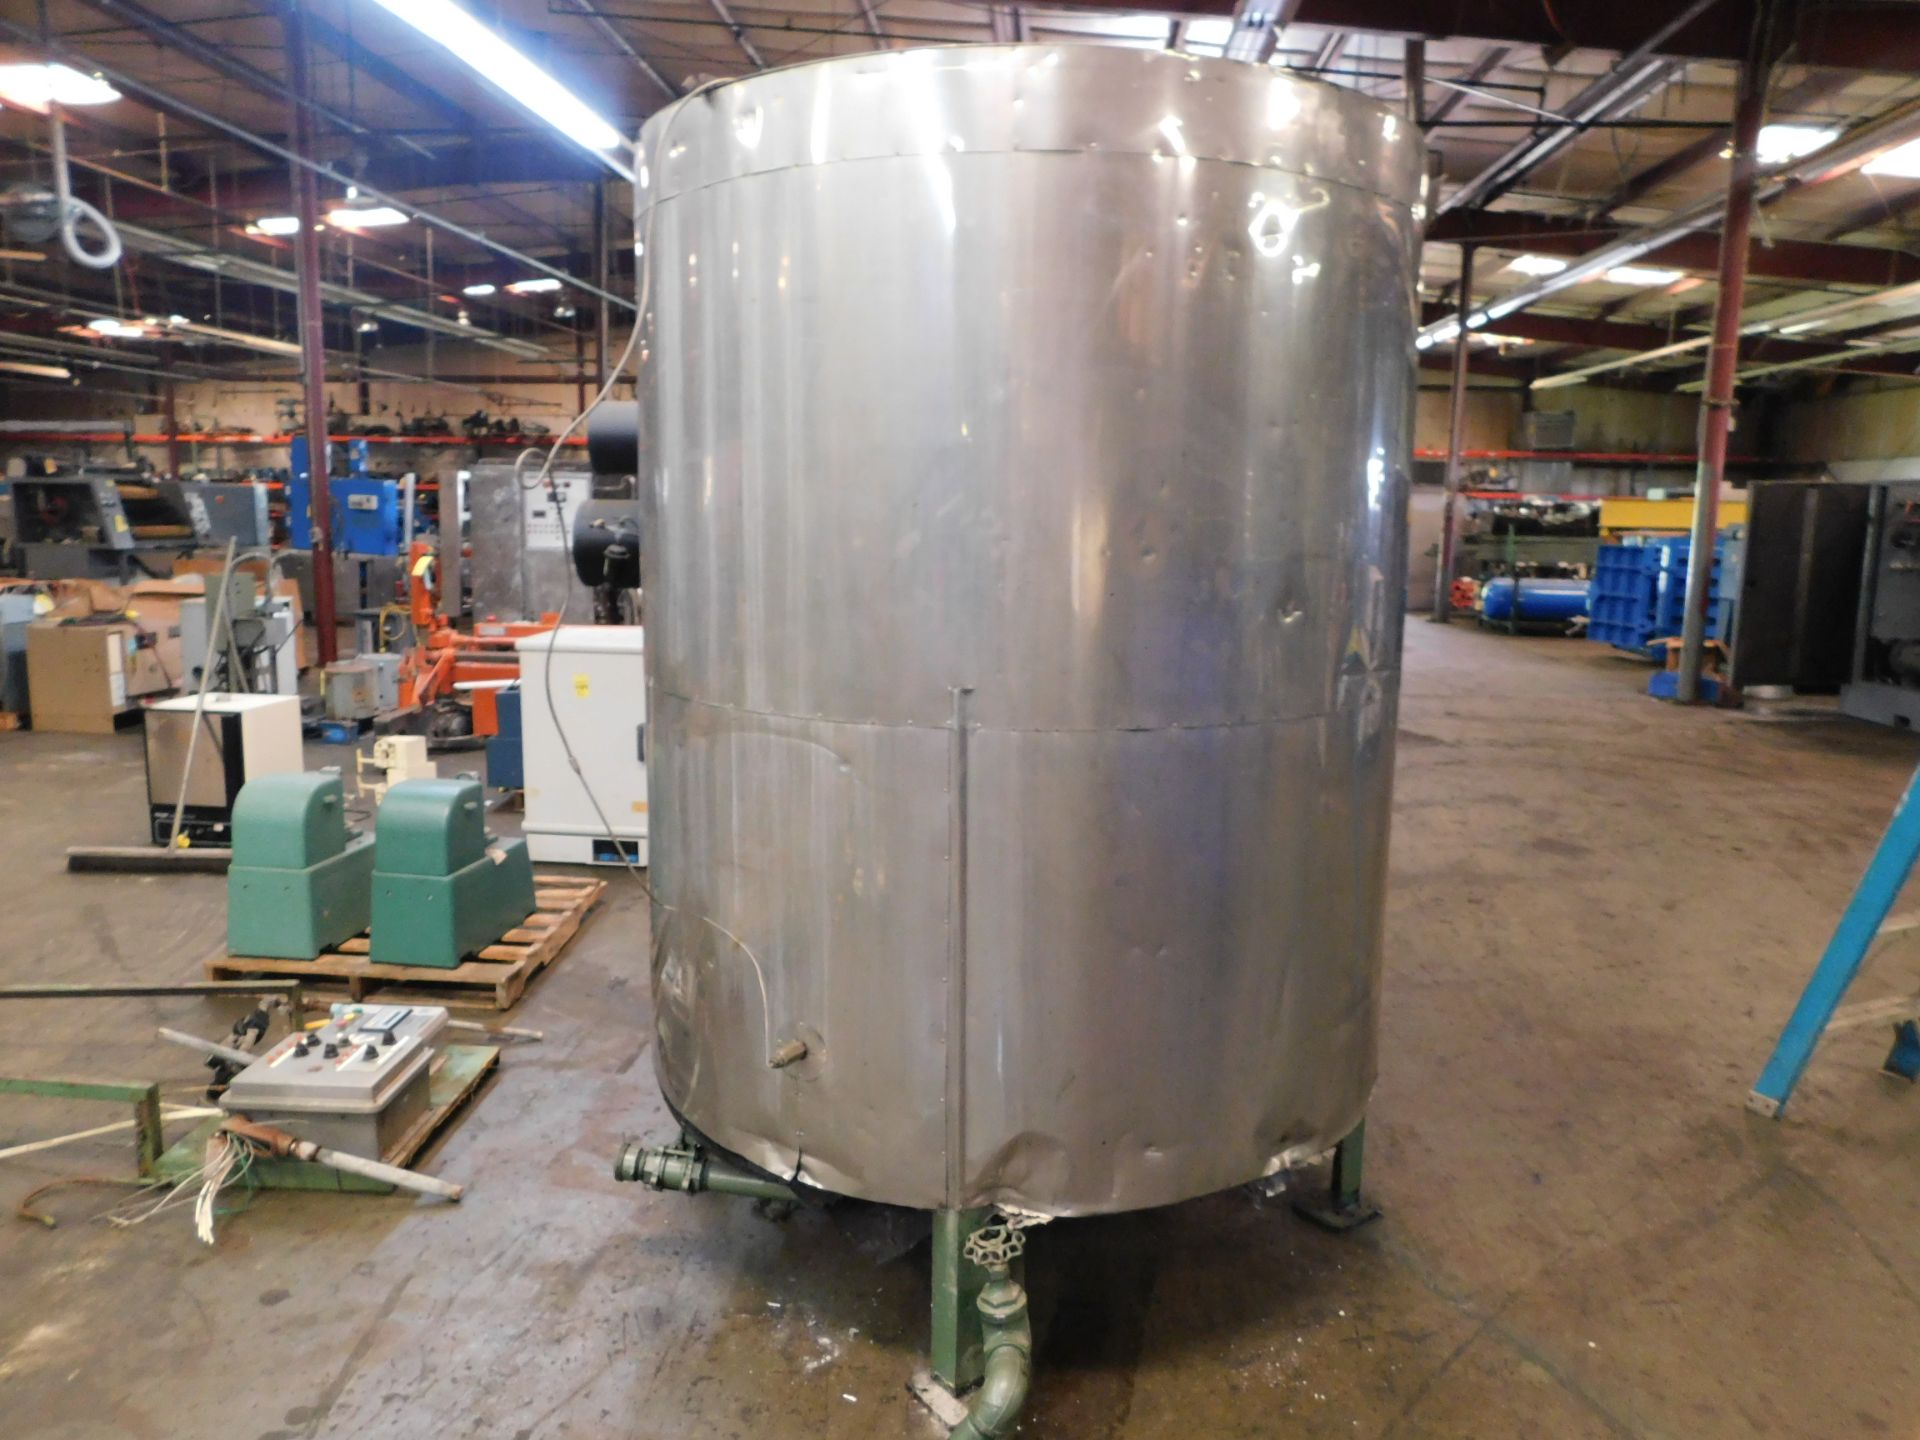 Stainless Steel Tank, 63.75 inches Diameter, 75.5 inches Height, Discharge Bottom, Rigging Fee $50 - Image 2 of 3